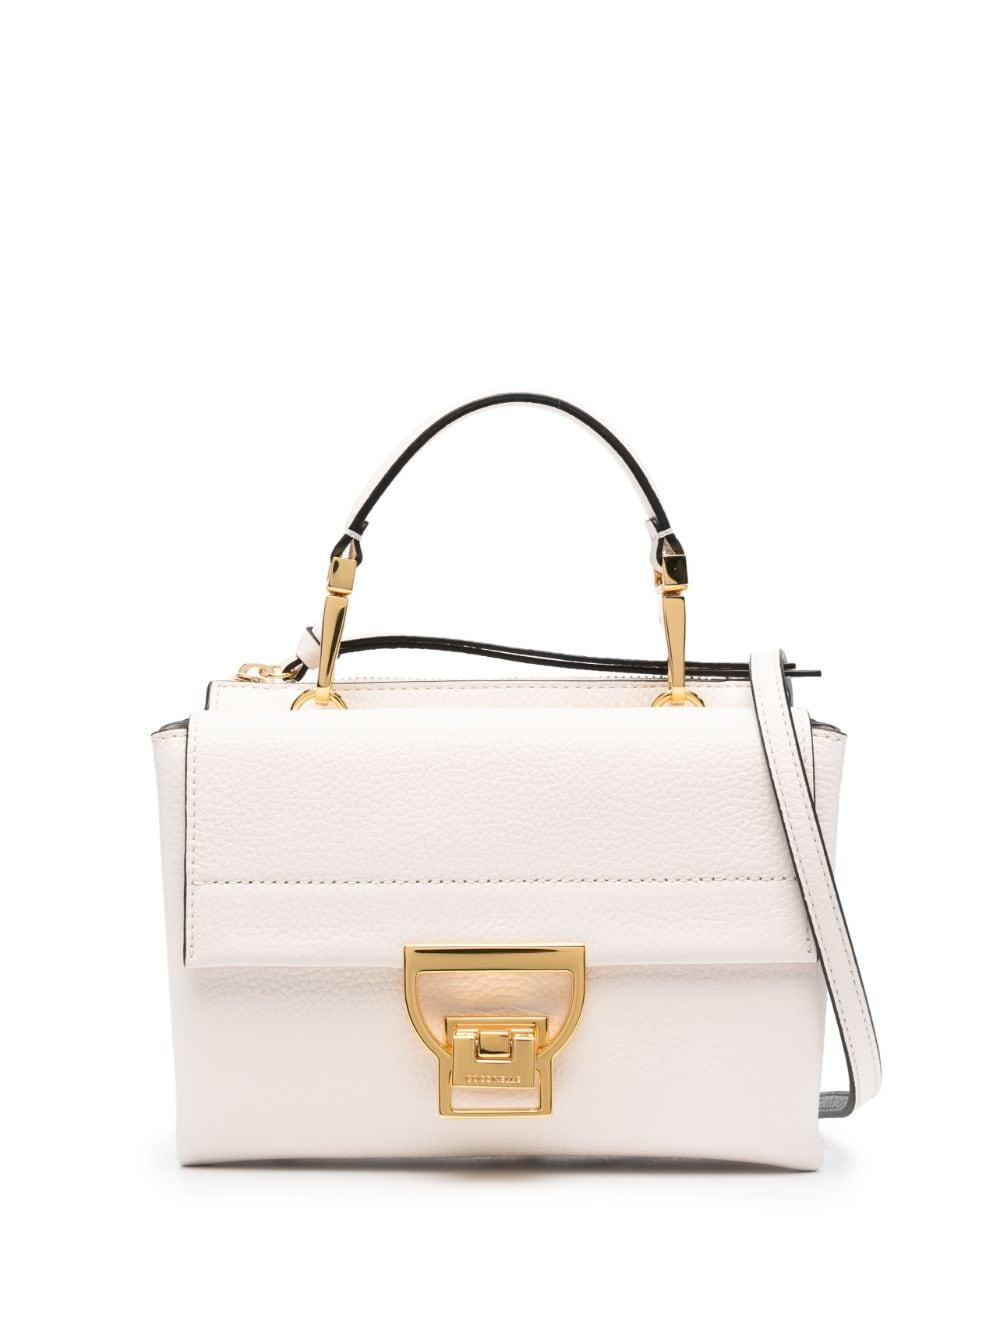 Coccinelle Arlettis Leather Shoulder Bag in White | Lyst